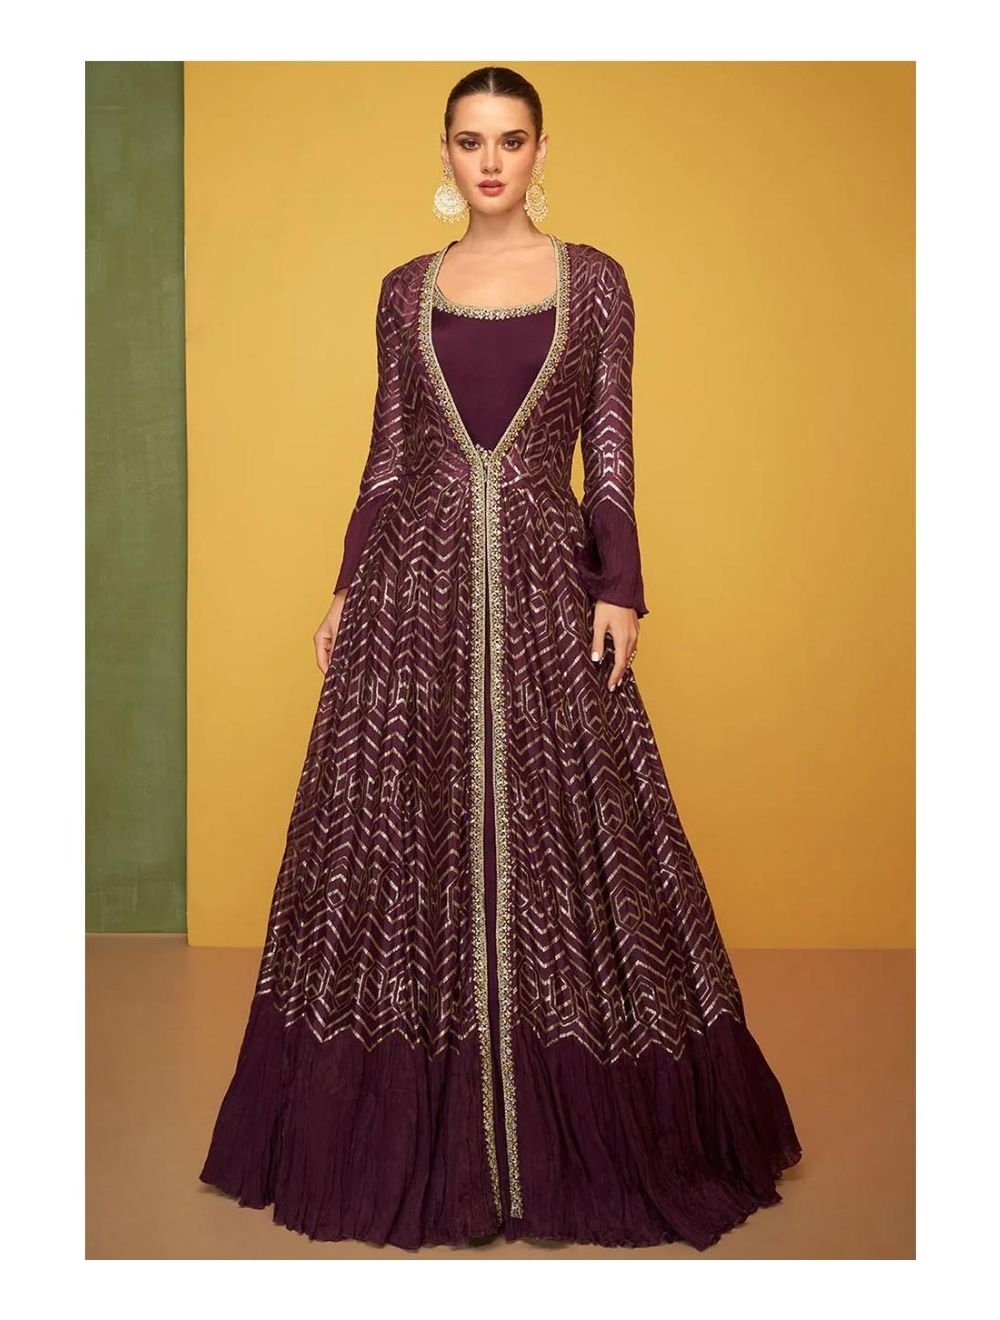 Jacket Gowns Trend  Indian Gowns and Anarkalis With Long Jackets  Party  wear long gowns Indian gowns Indian fashion dresses